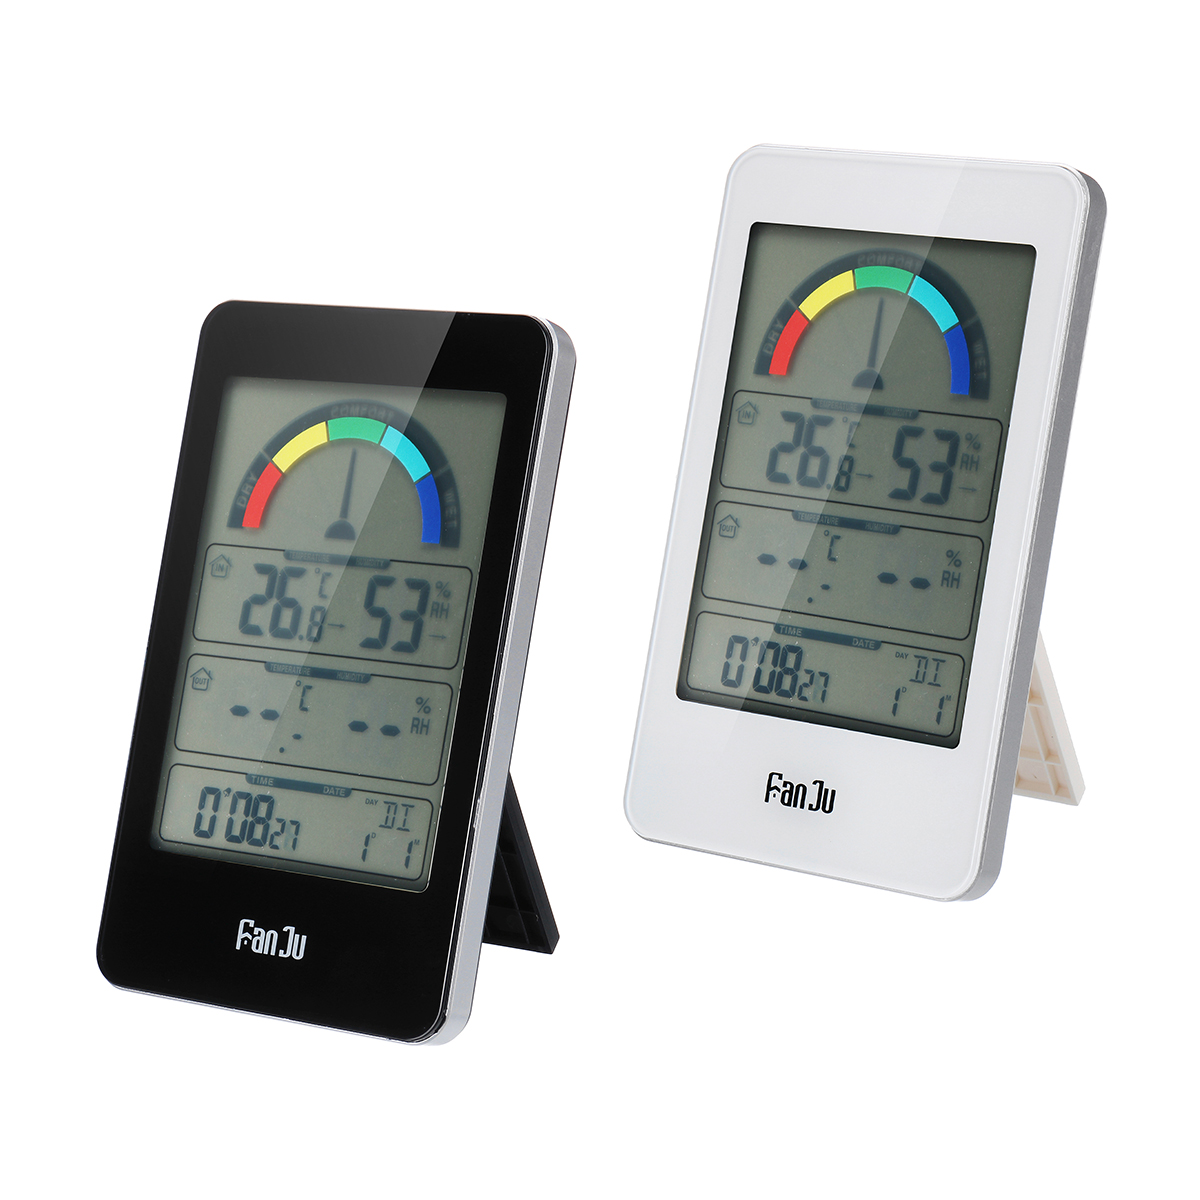 Digital-Indoor-and-Outdoor-Thermometer-Comfort-Indicator-Hygrometer-Temperature-Trend-Electronic-Ala-1509150-8